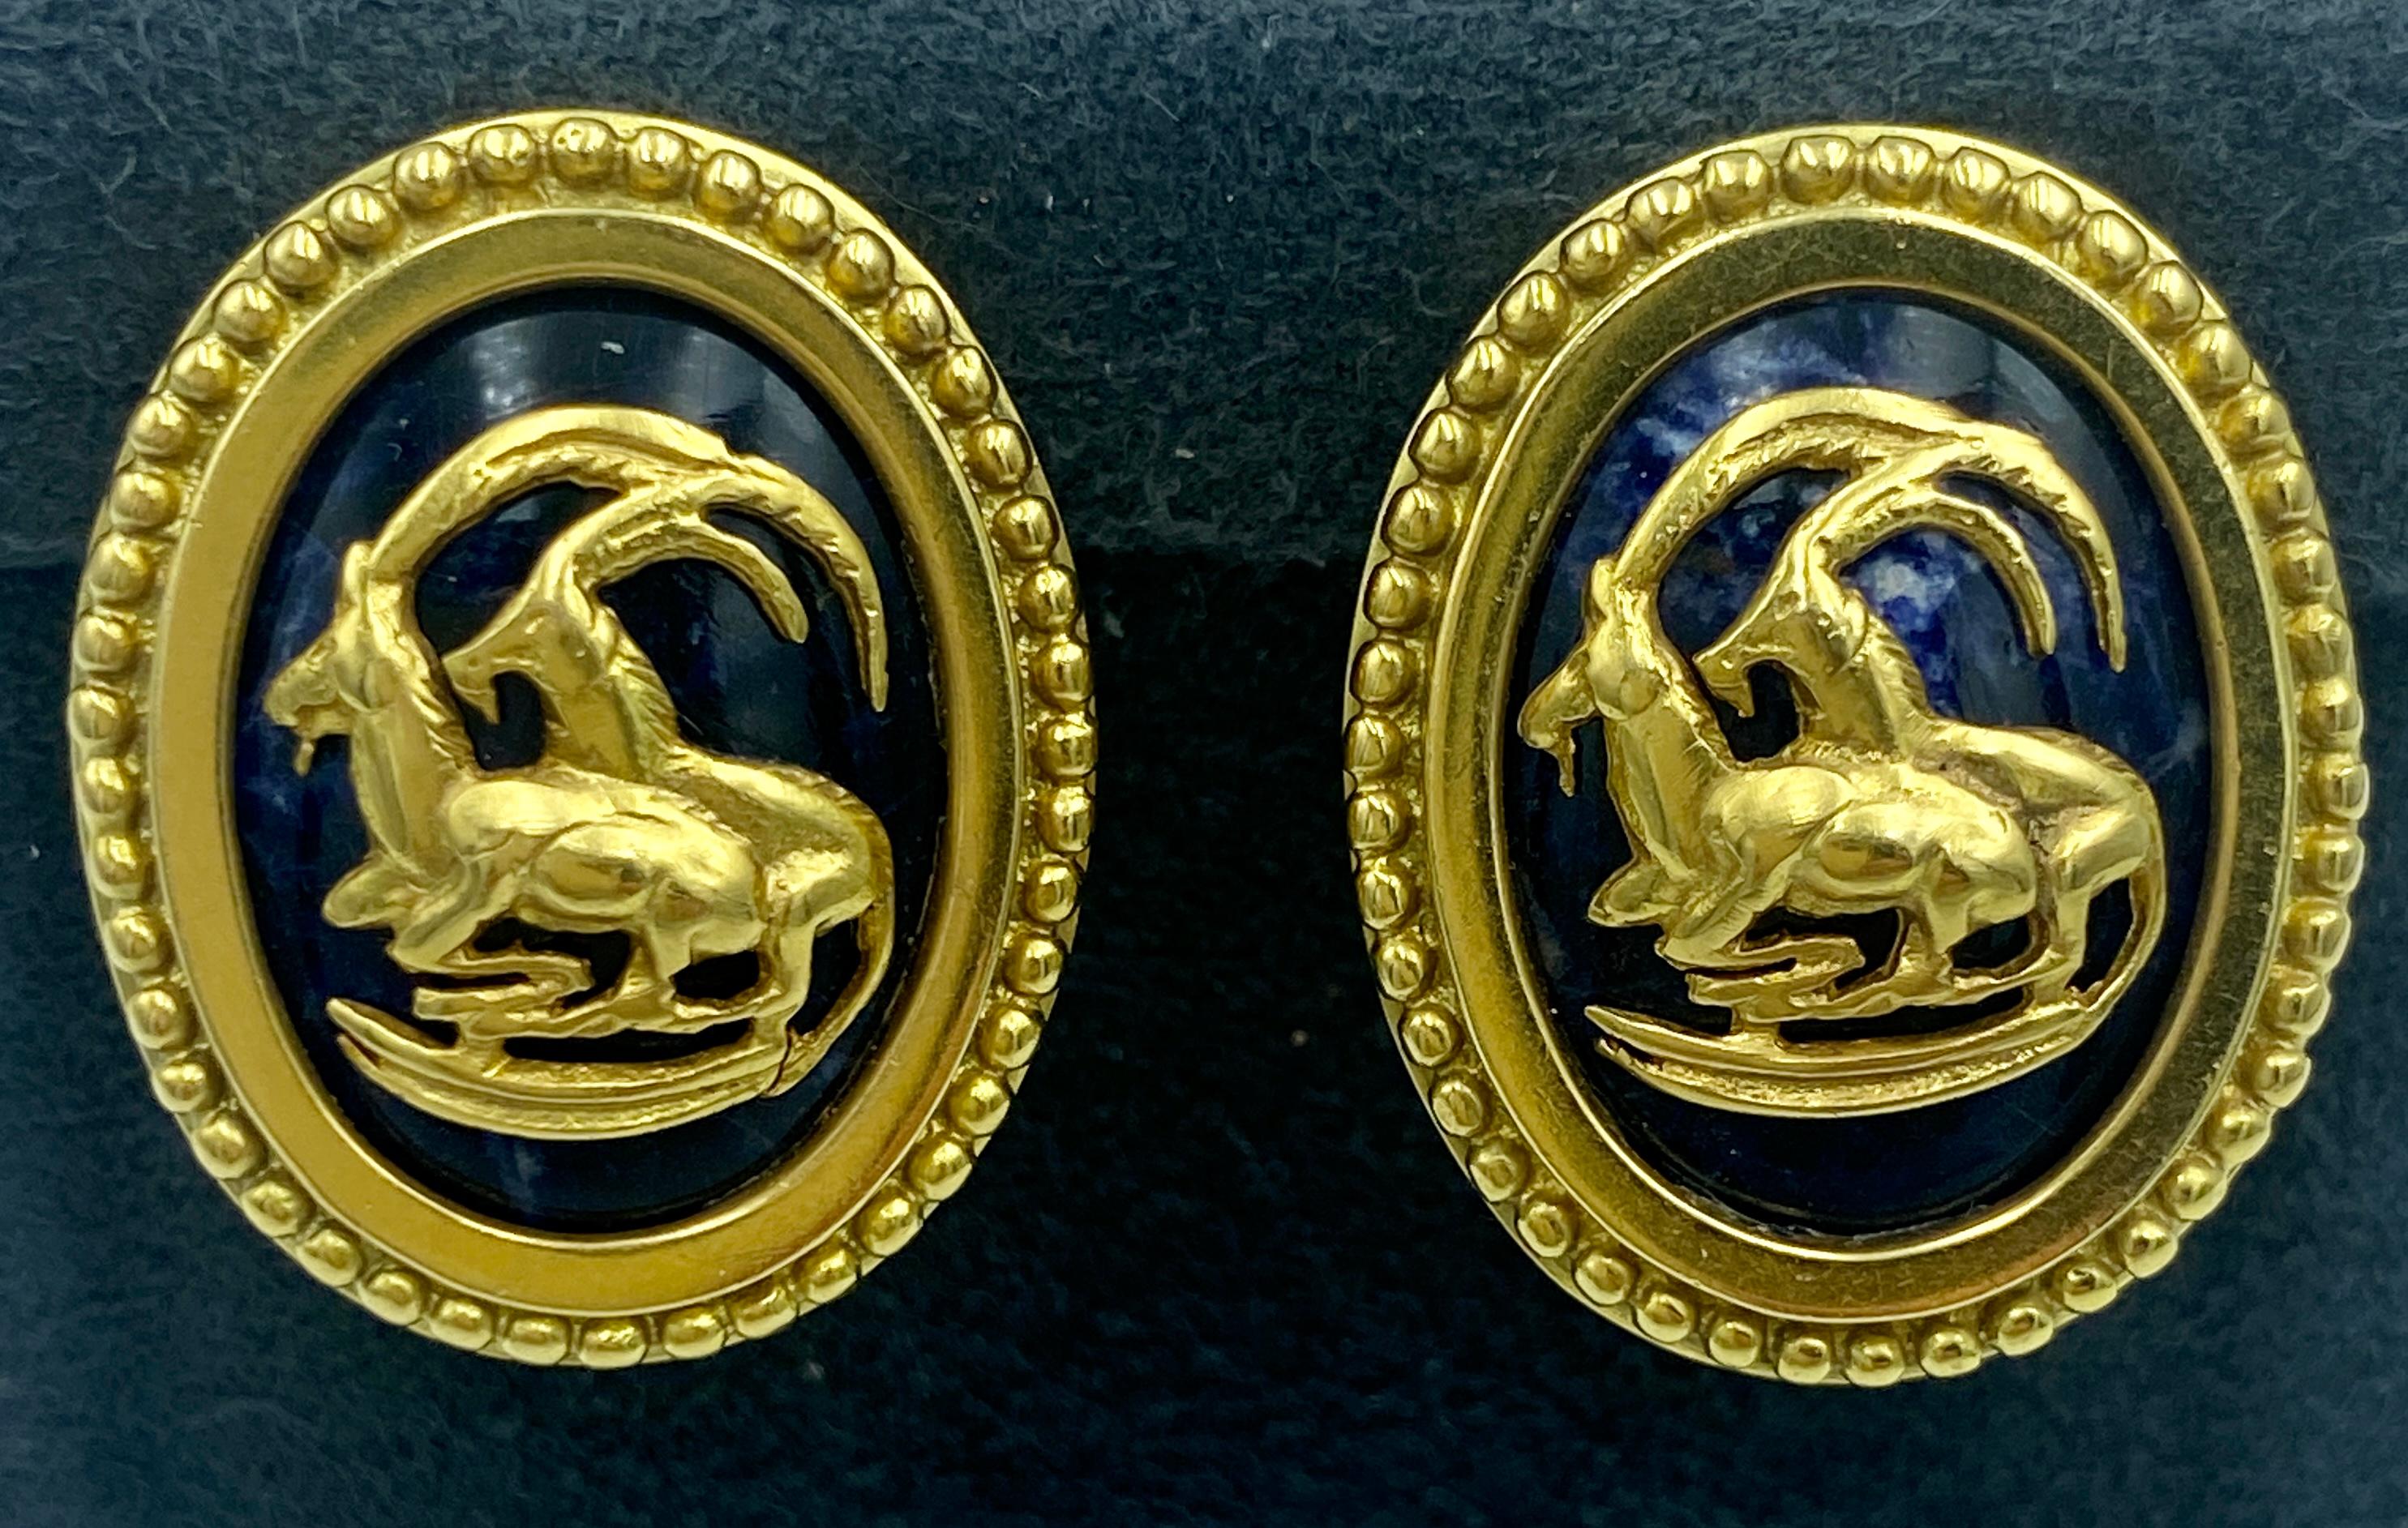 These 1970s Lalaounis clip-on earrings are shaped as medallions with mountain goat designs on them. Made of 18k gold the design is centred around a cabochon lapis lazuli.

They are a part of a set with a bracelet , a photo of which is given below.